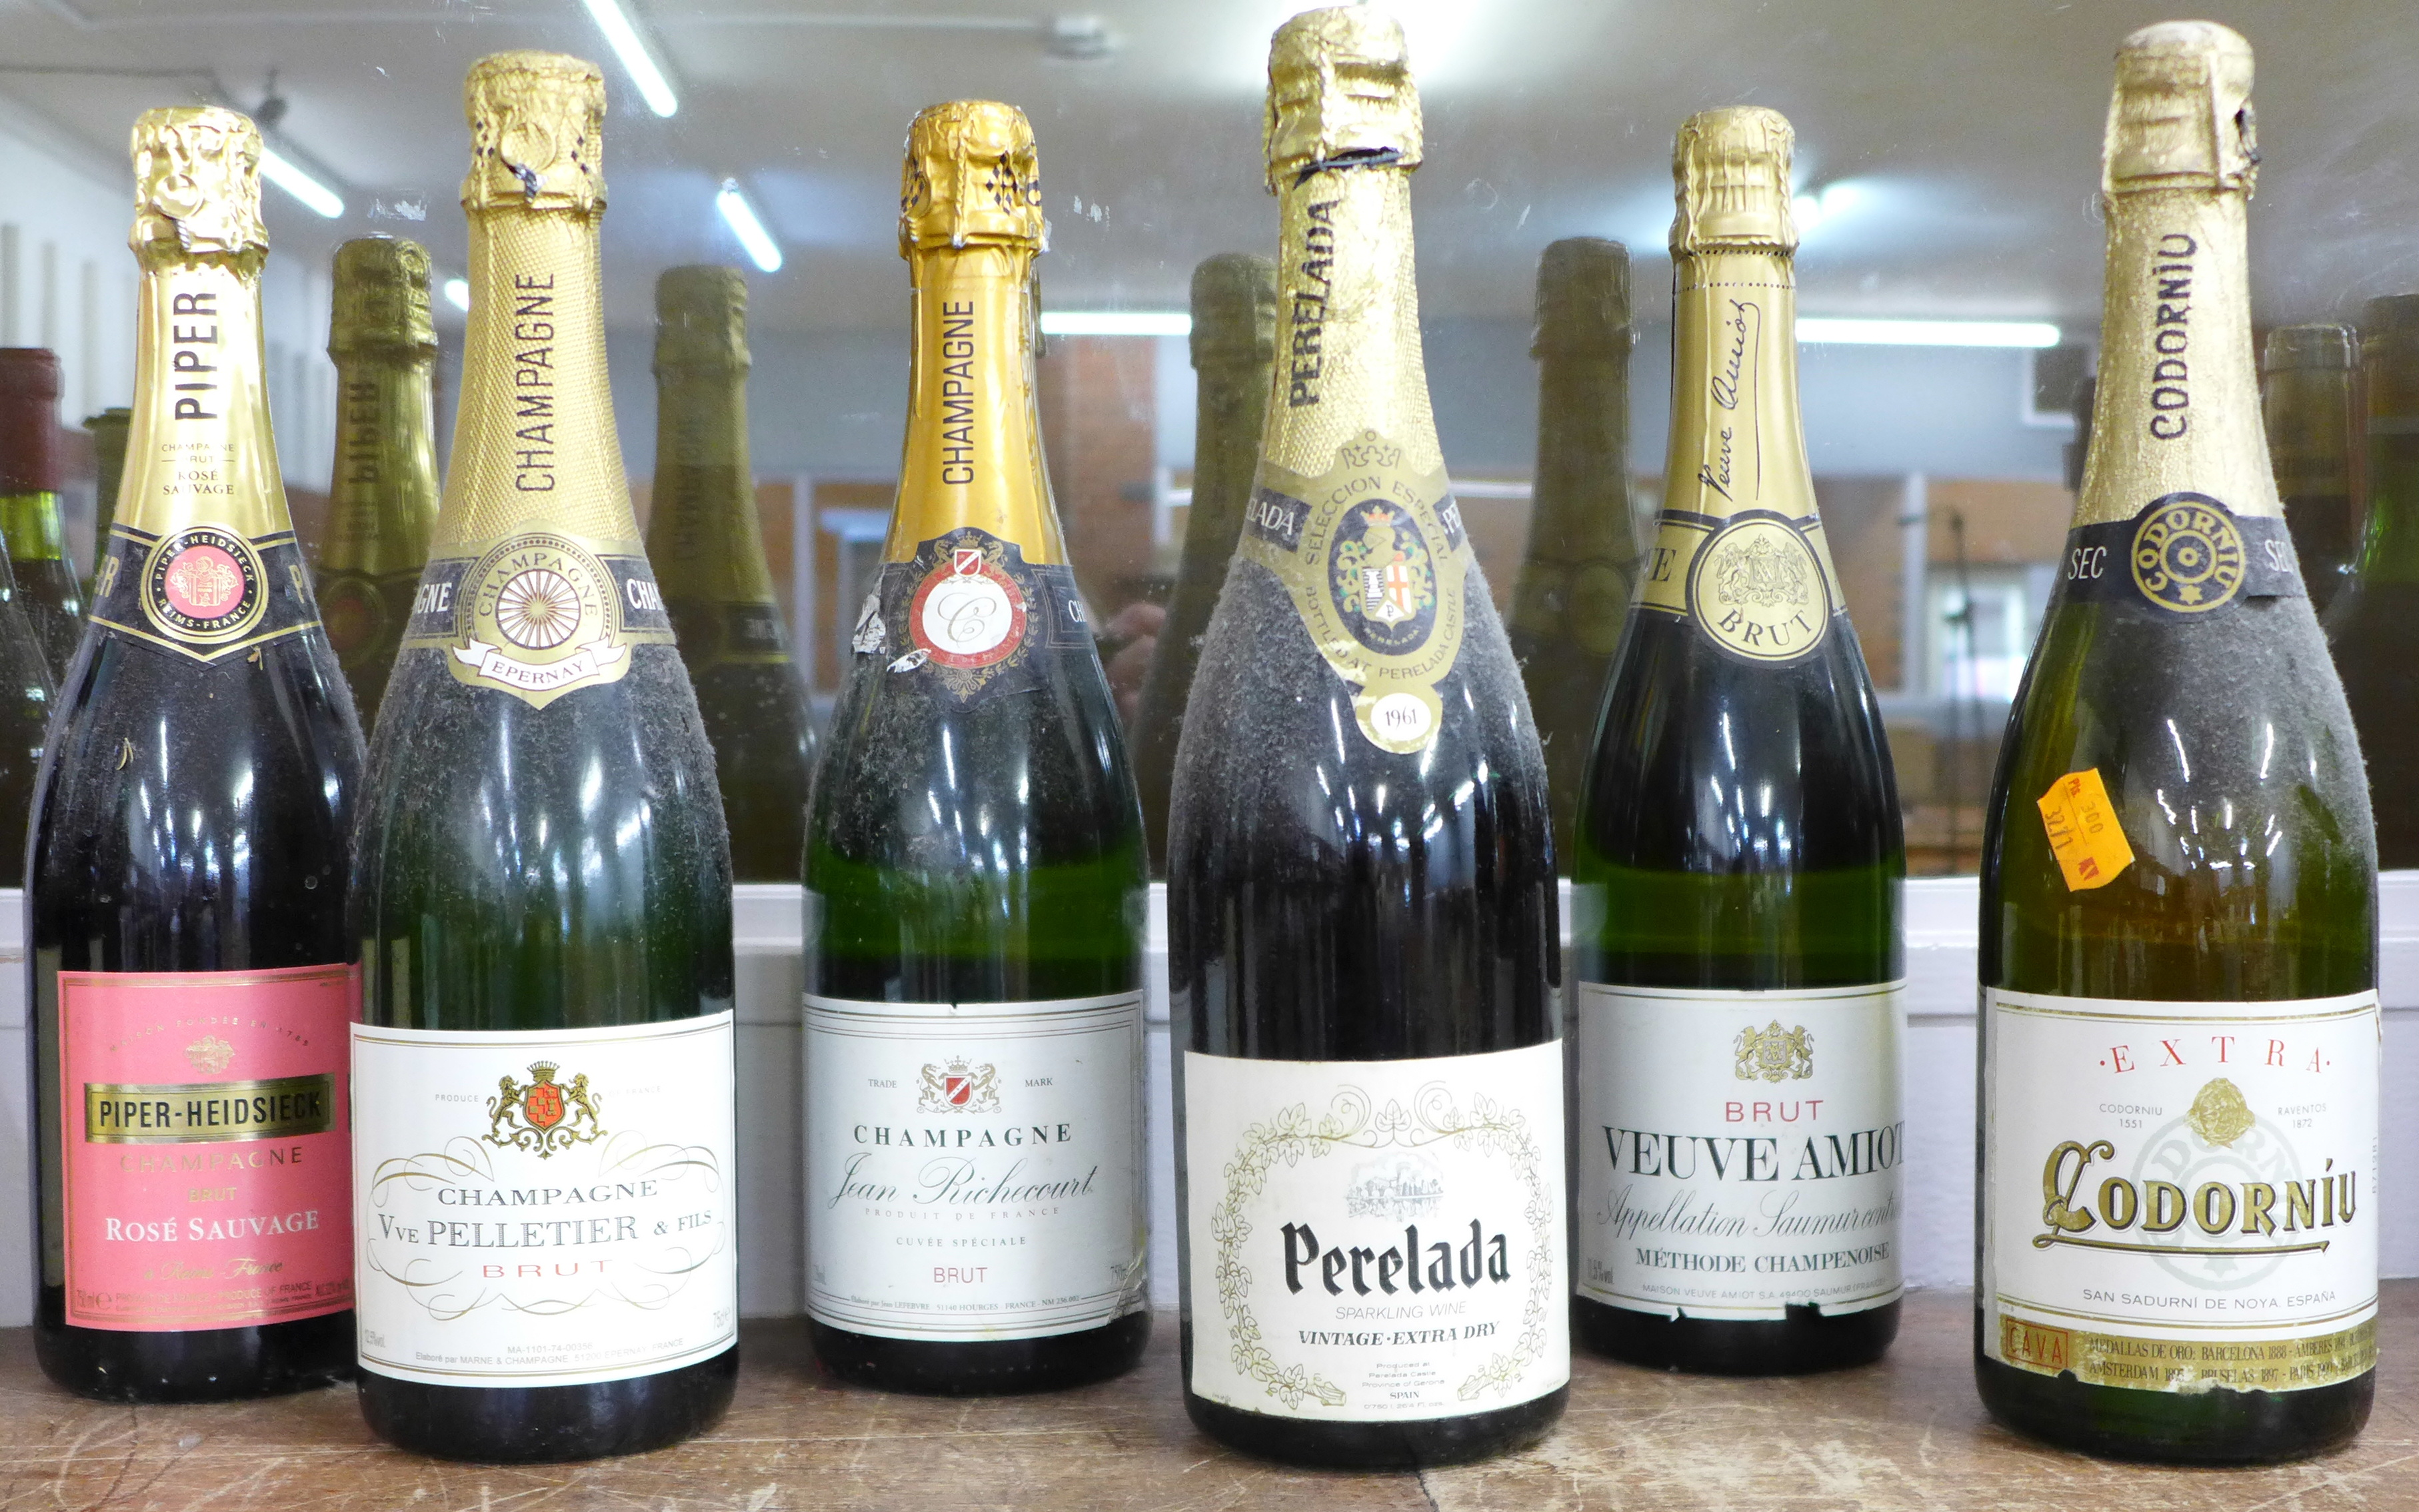 A bottle of Piper Heidsieck champagne and Jean Richcourt champagne and four bottles of Brut